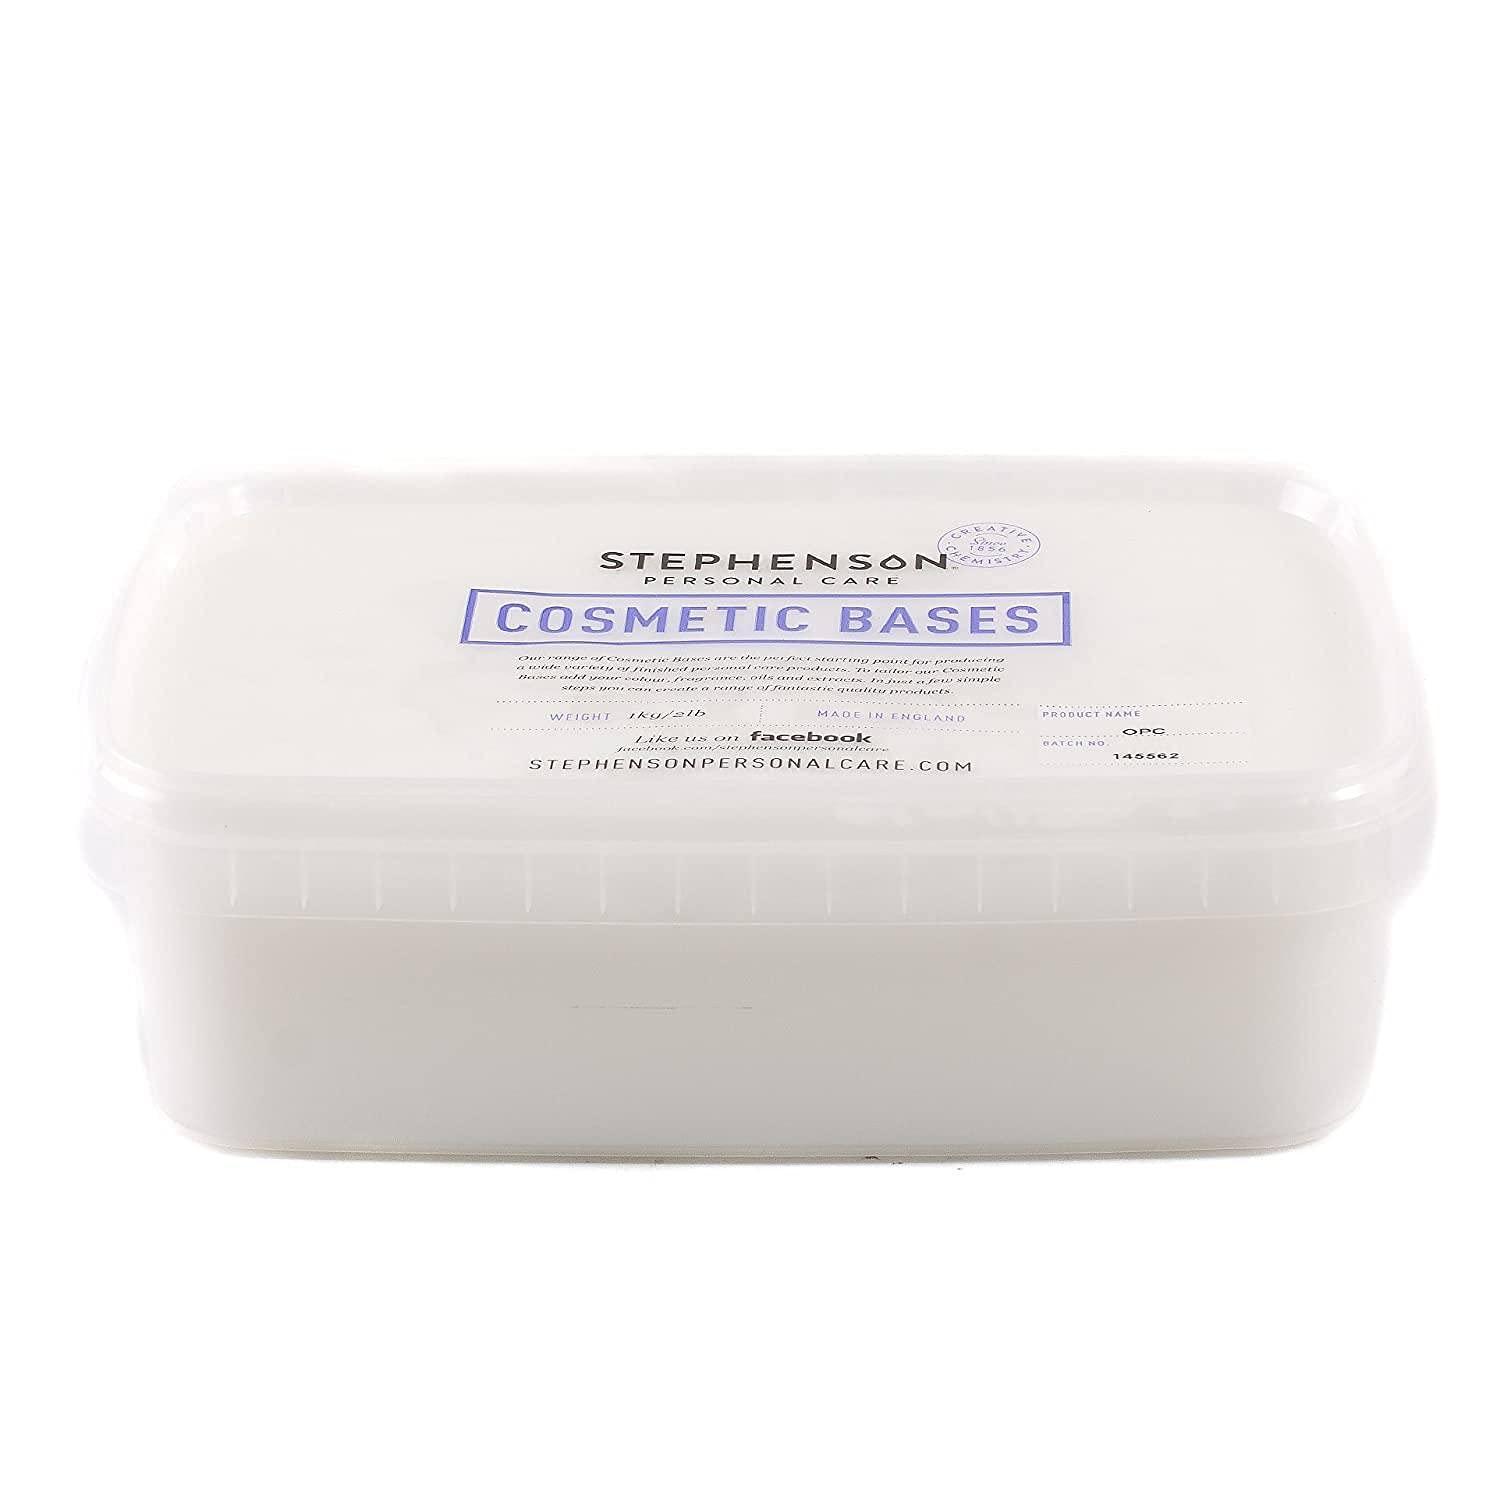  Foaming Bath Butter Base (Crystal Opc), Stephenson Brand, Whipped Sugar Scrub Base, Whipped Soap Scrub, Whipped Bath Butter, Skin  Care Product